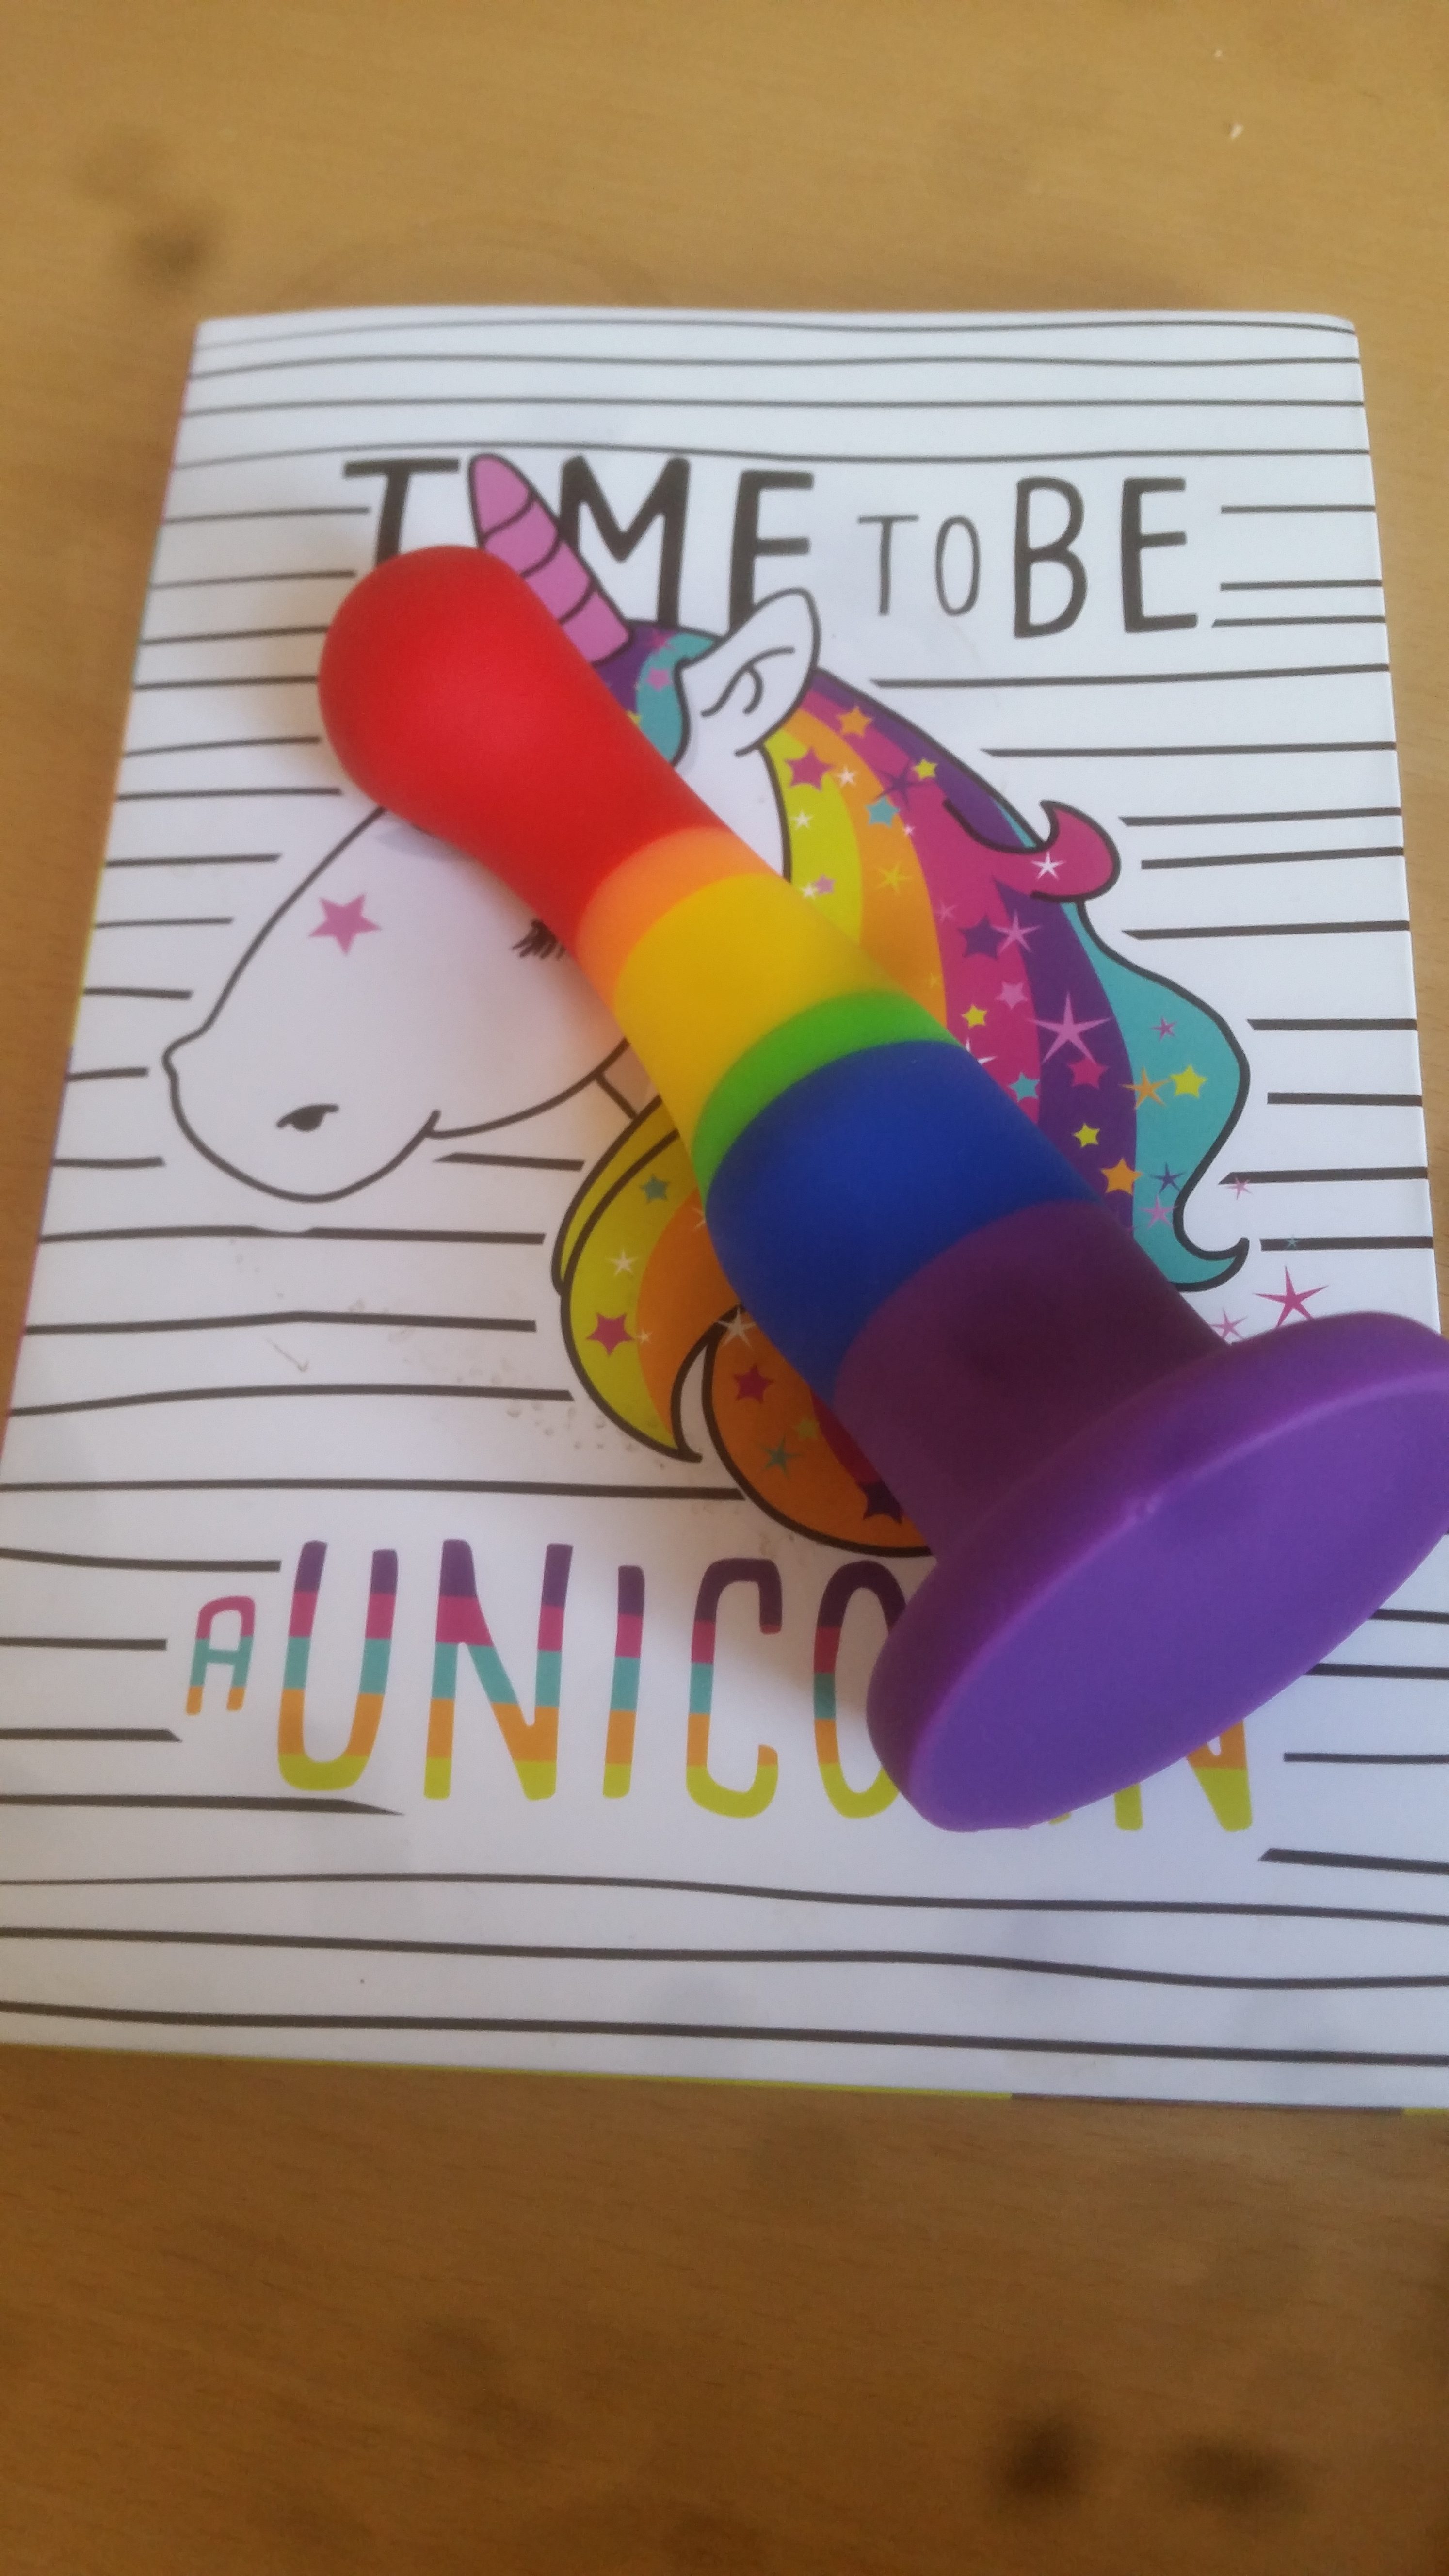 A rainbow dildo lying on a white notebook with a unicorn on the cover.